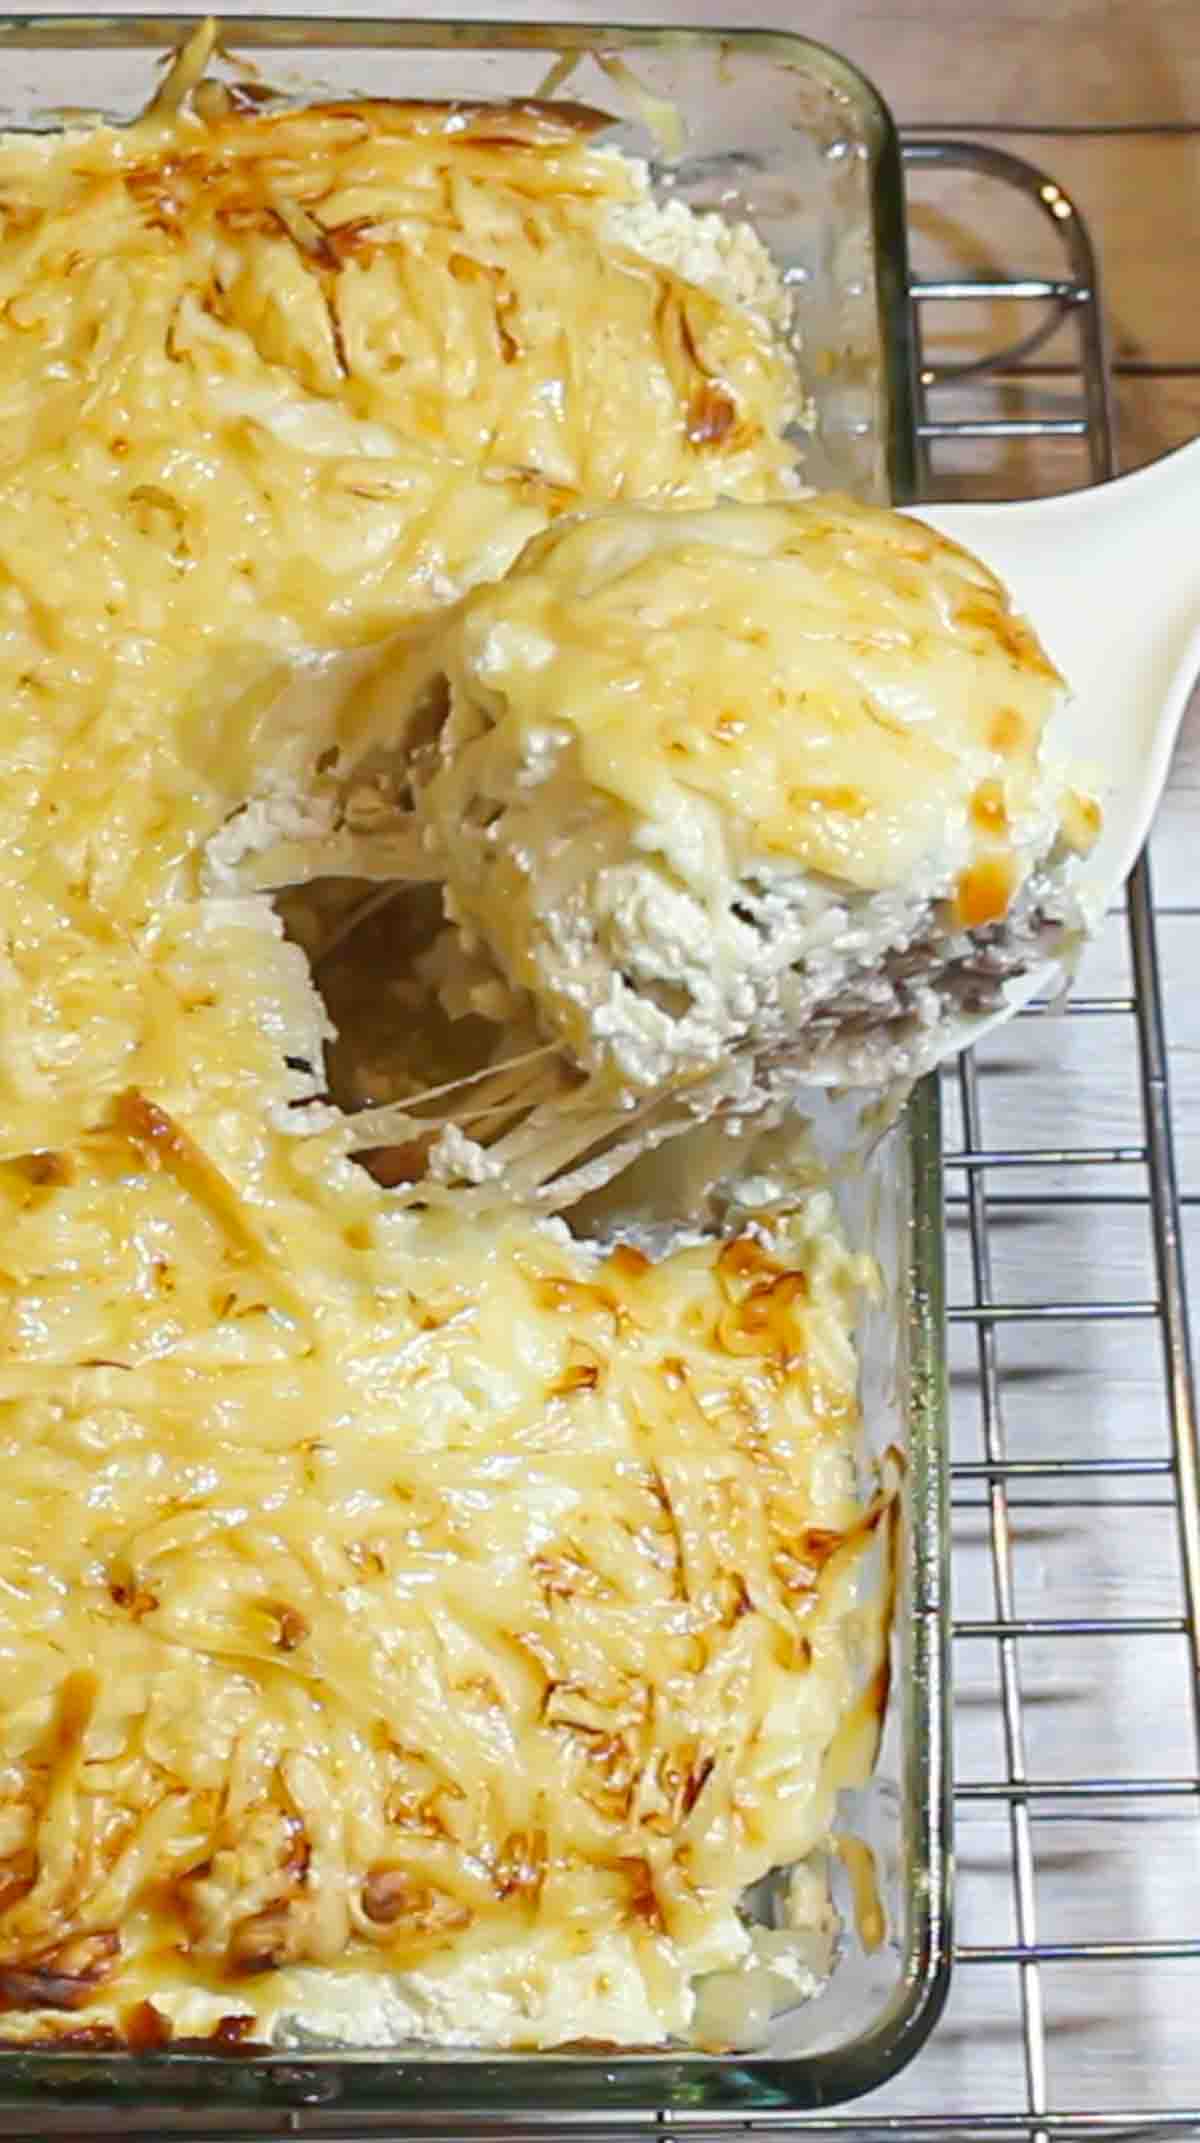 A casserole dish with a scoop of cheese on top.